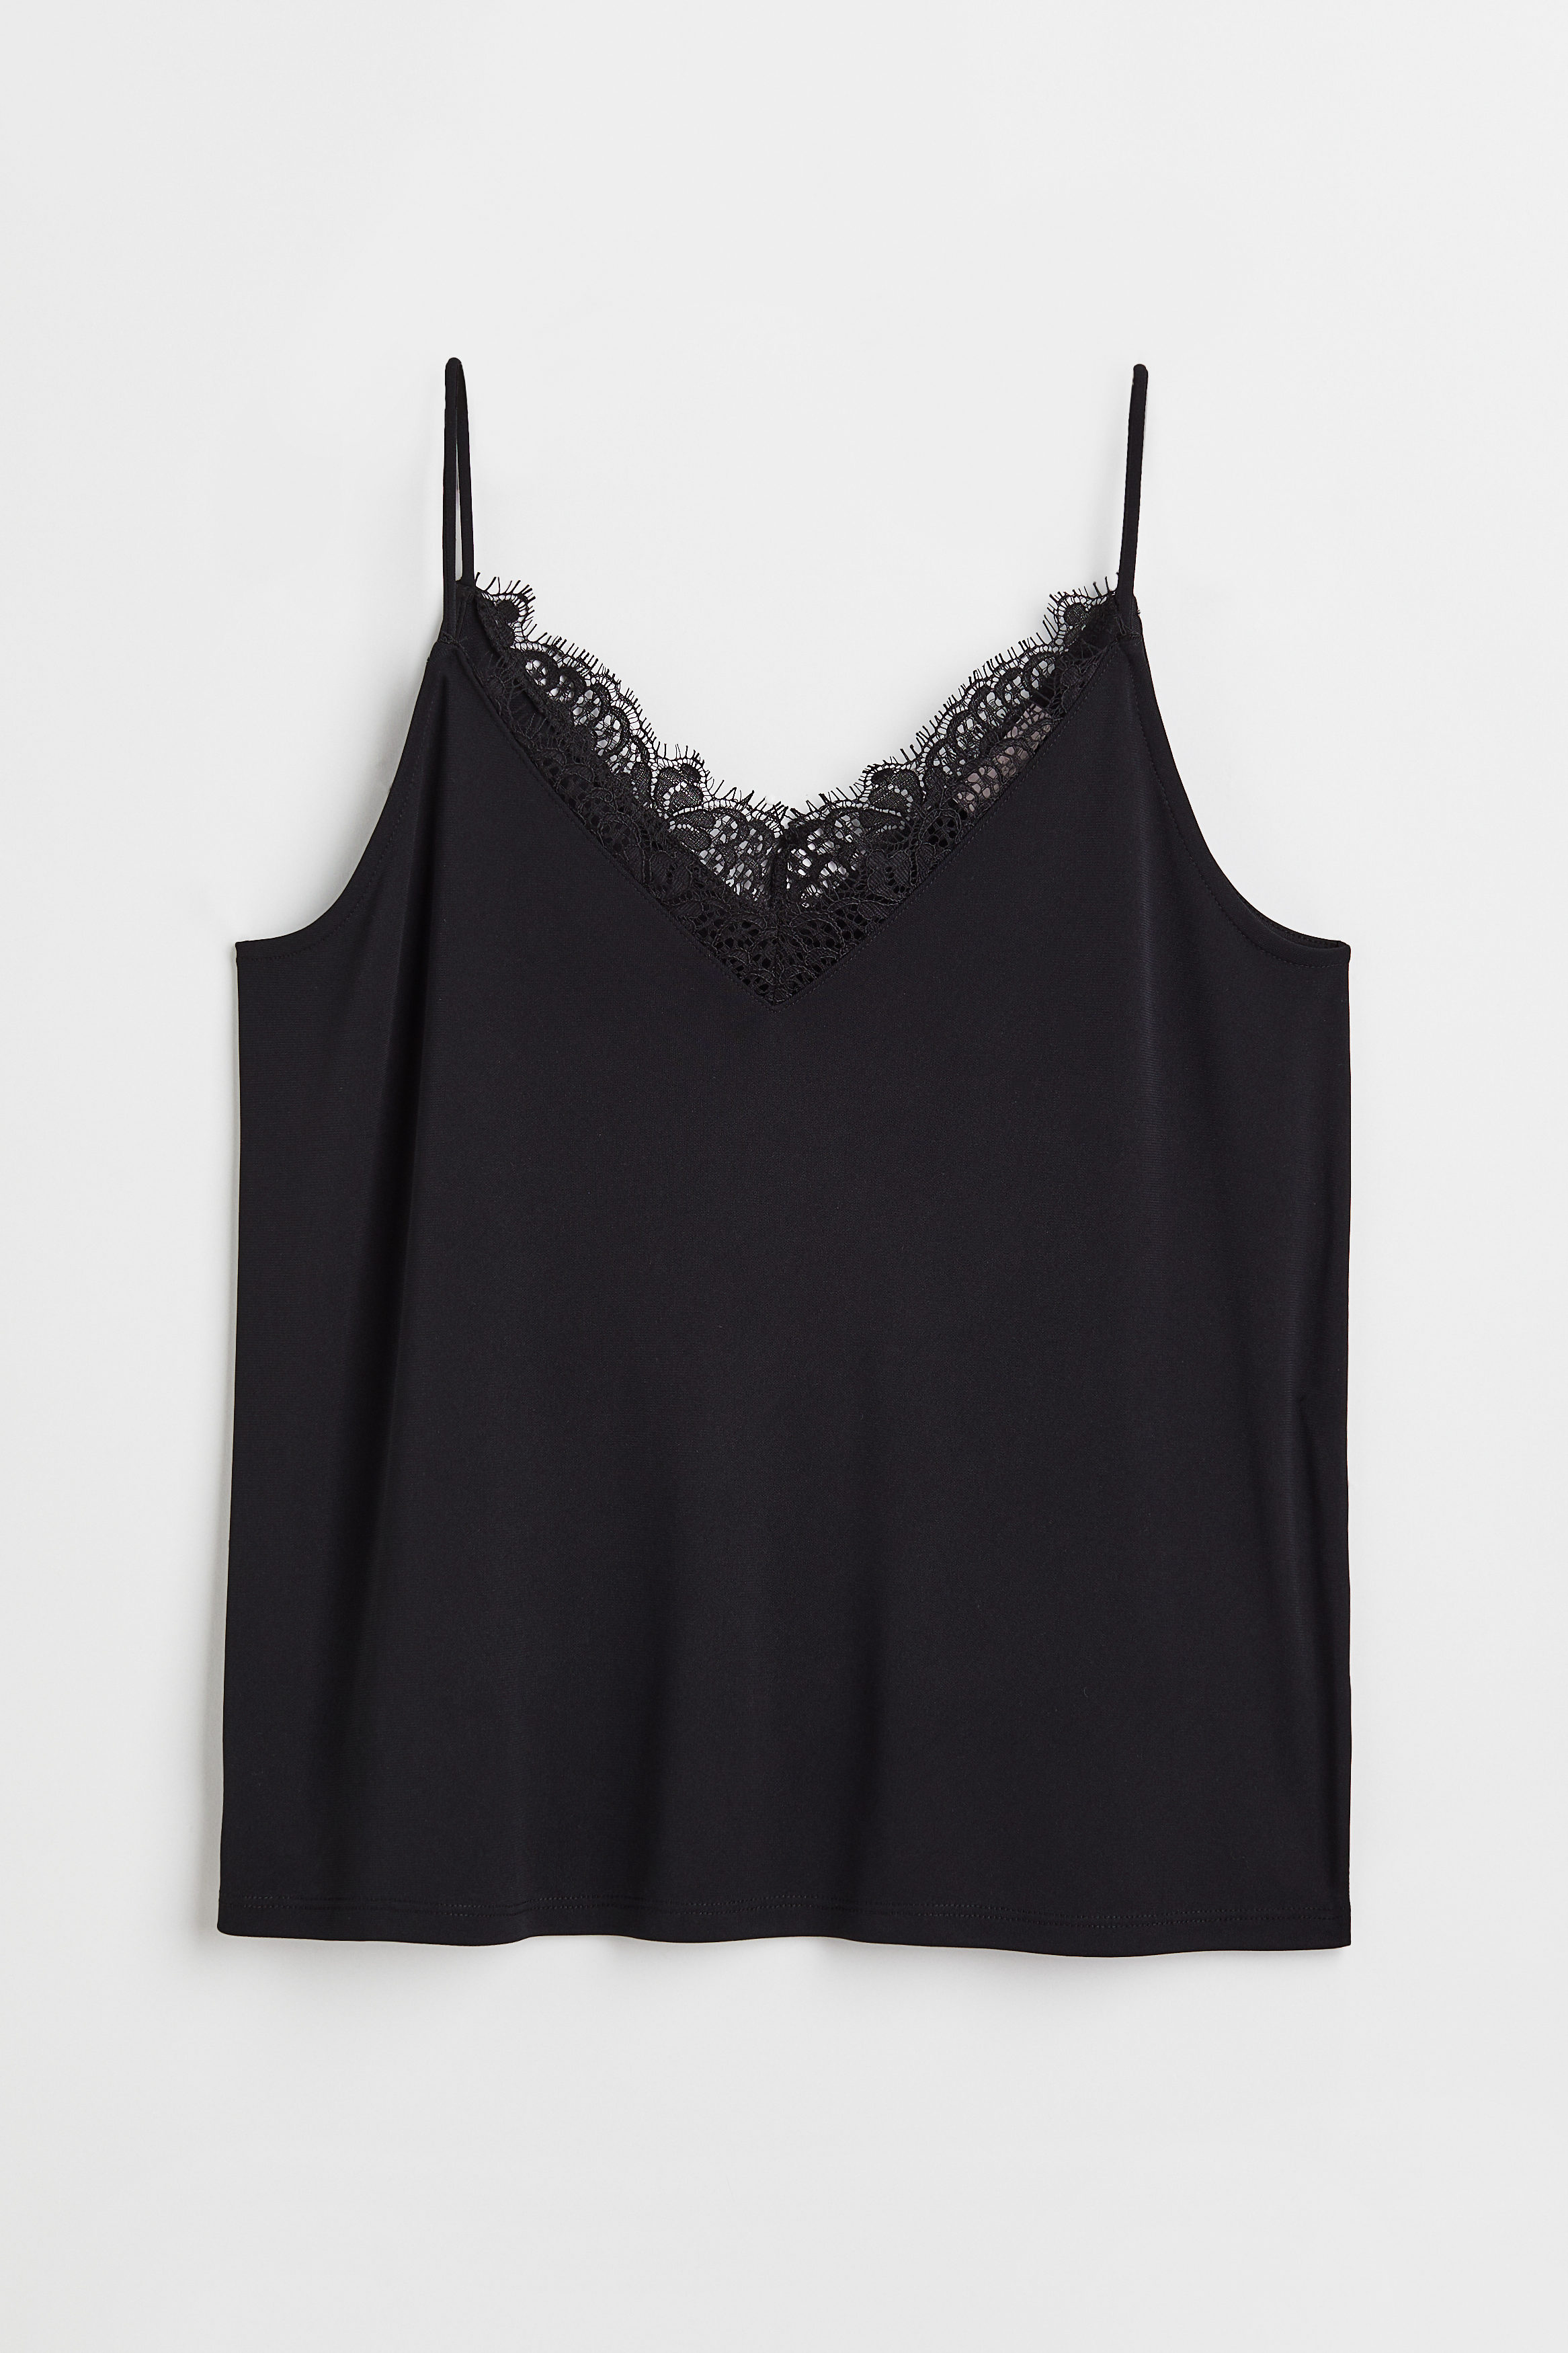 Emmiol Free shipping 2024 Ribbon Lace Patchwork Cutout Cami Top Black S in  Cami Tops online store.